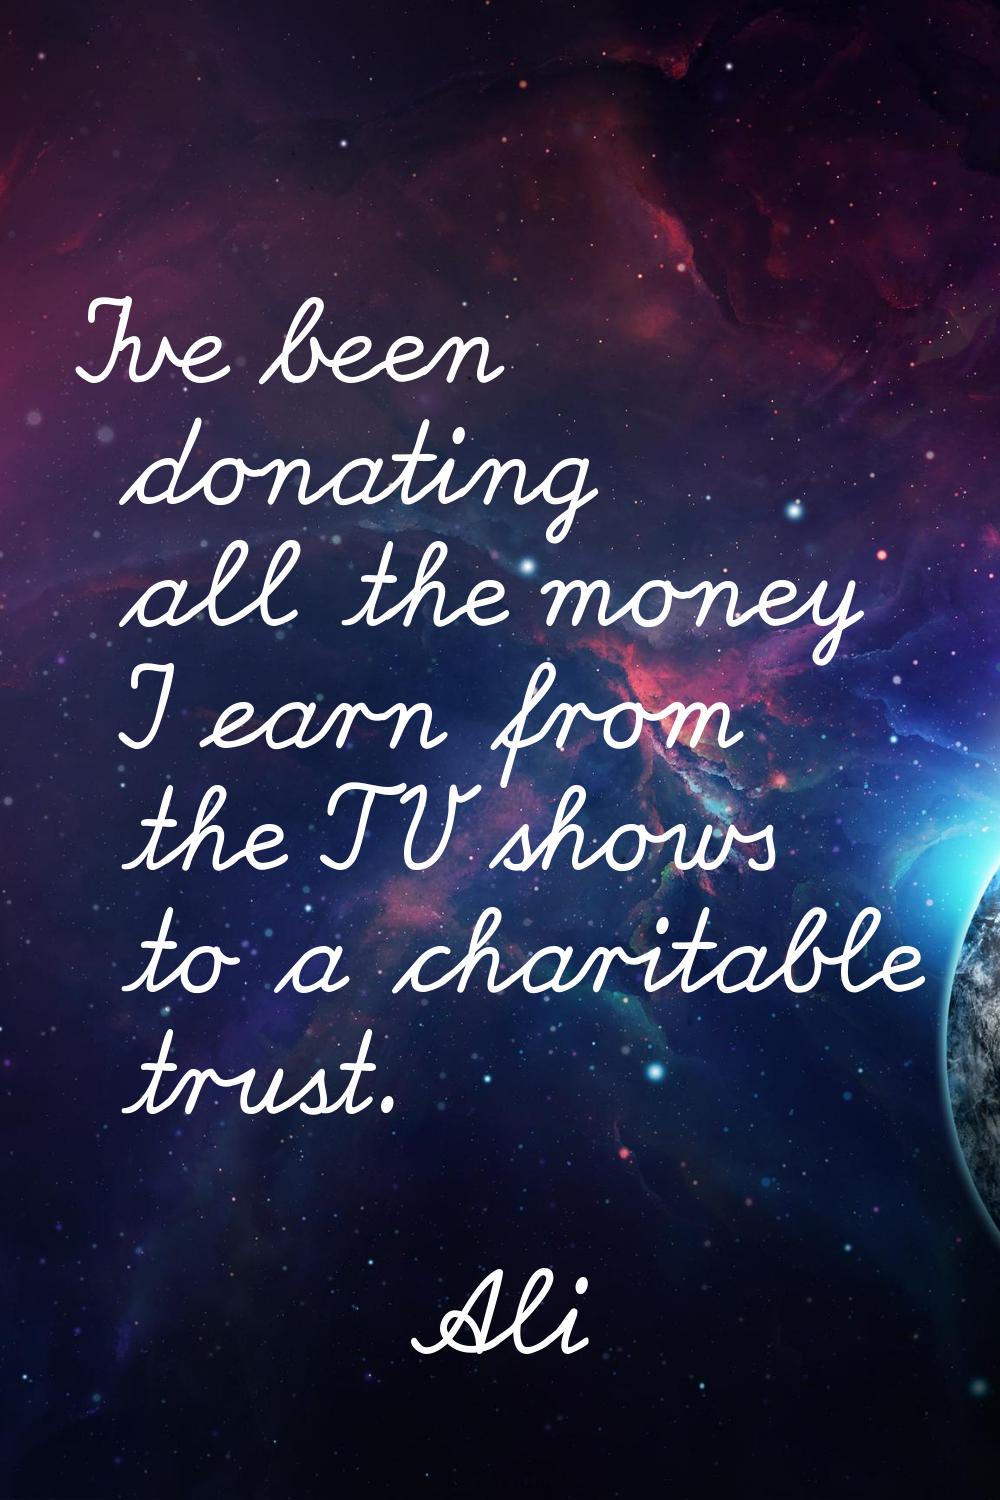 I've been donating all the money I earn from the TV shows to a charitable trust.